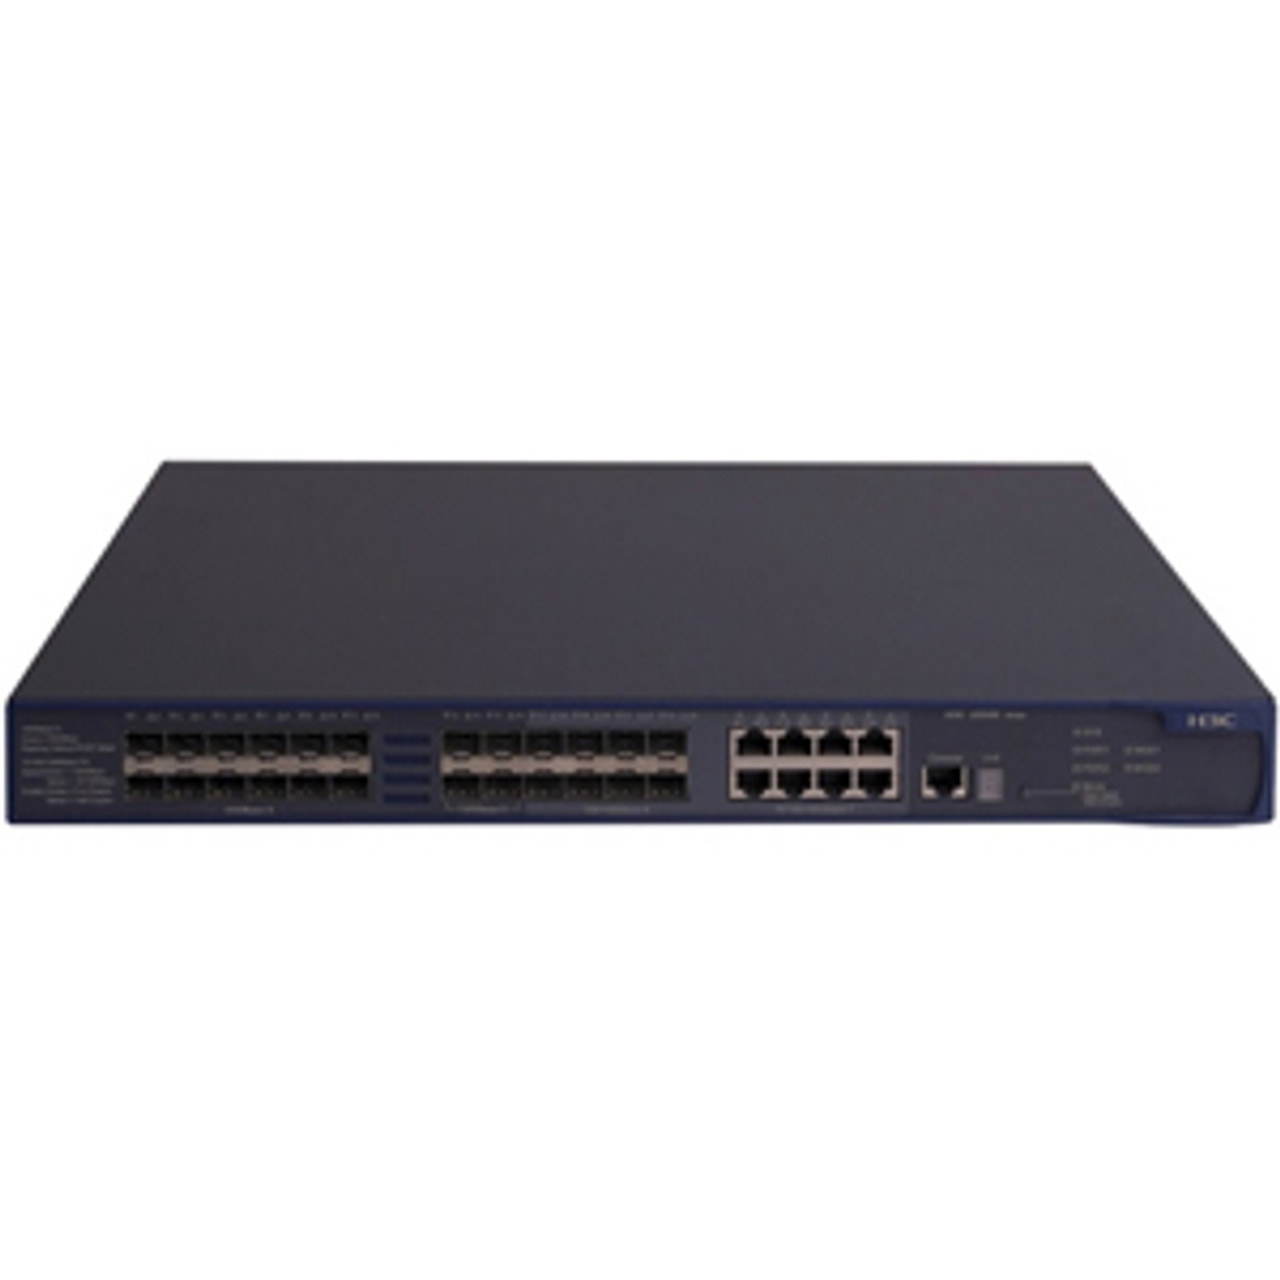 JC106A HP A5820-14XG-SFP+ Layer 3 Switch 4-Ports Manageable 4 x RJ-45 Stack Port 17 x Expansion Slots (Refurbished)